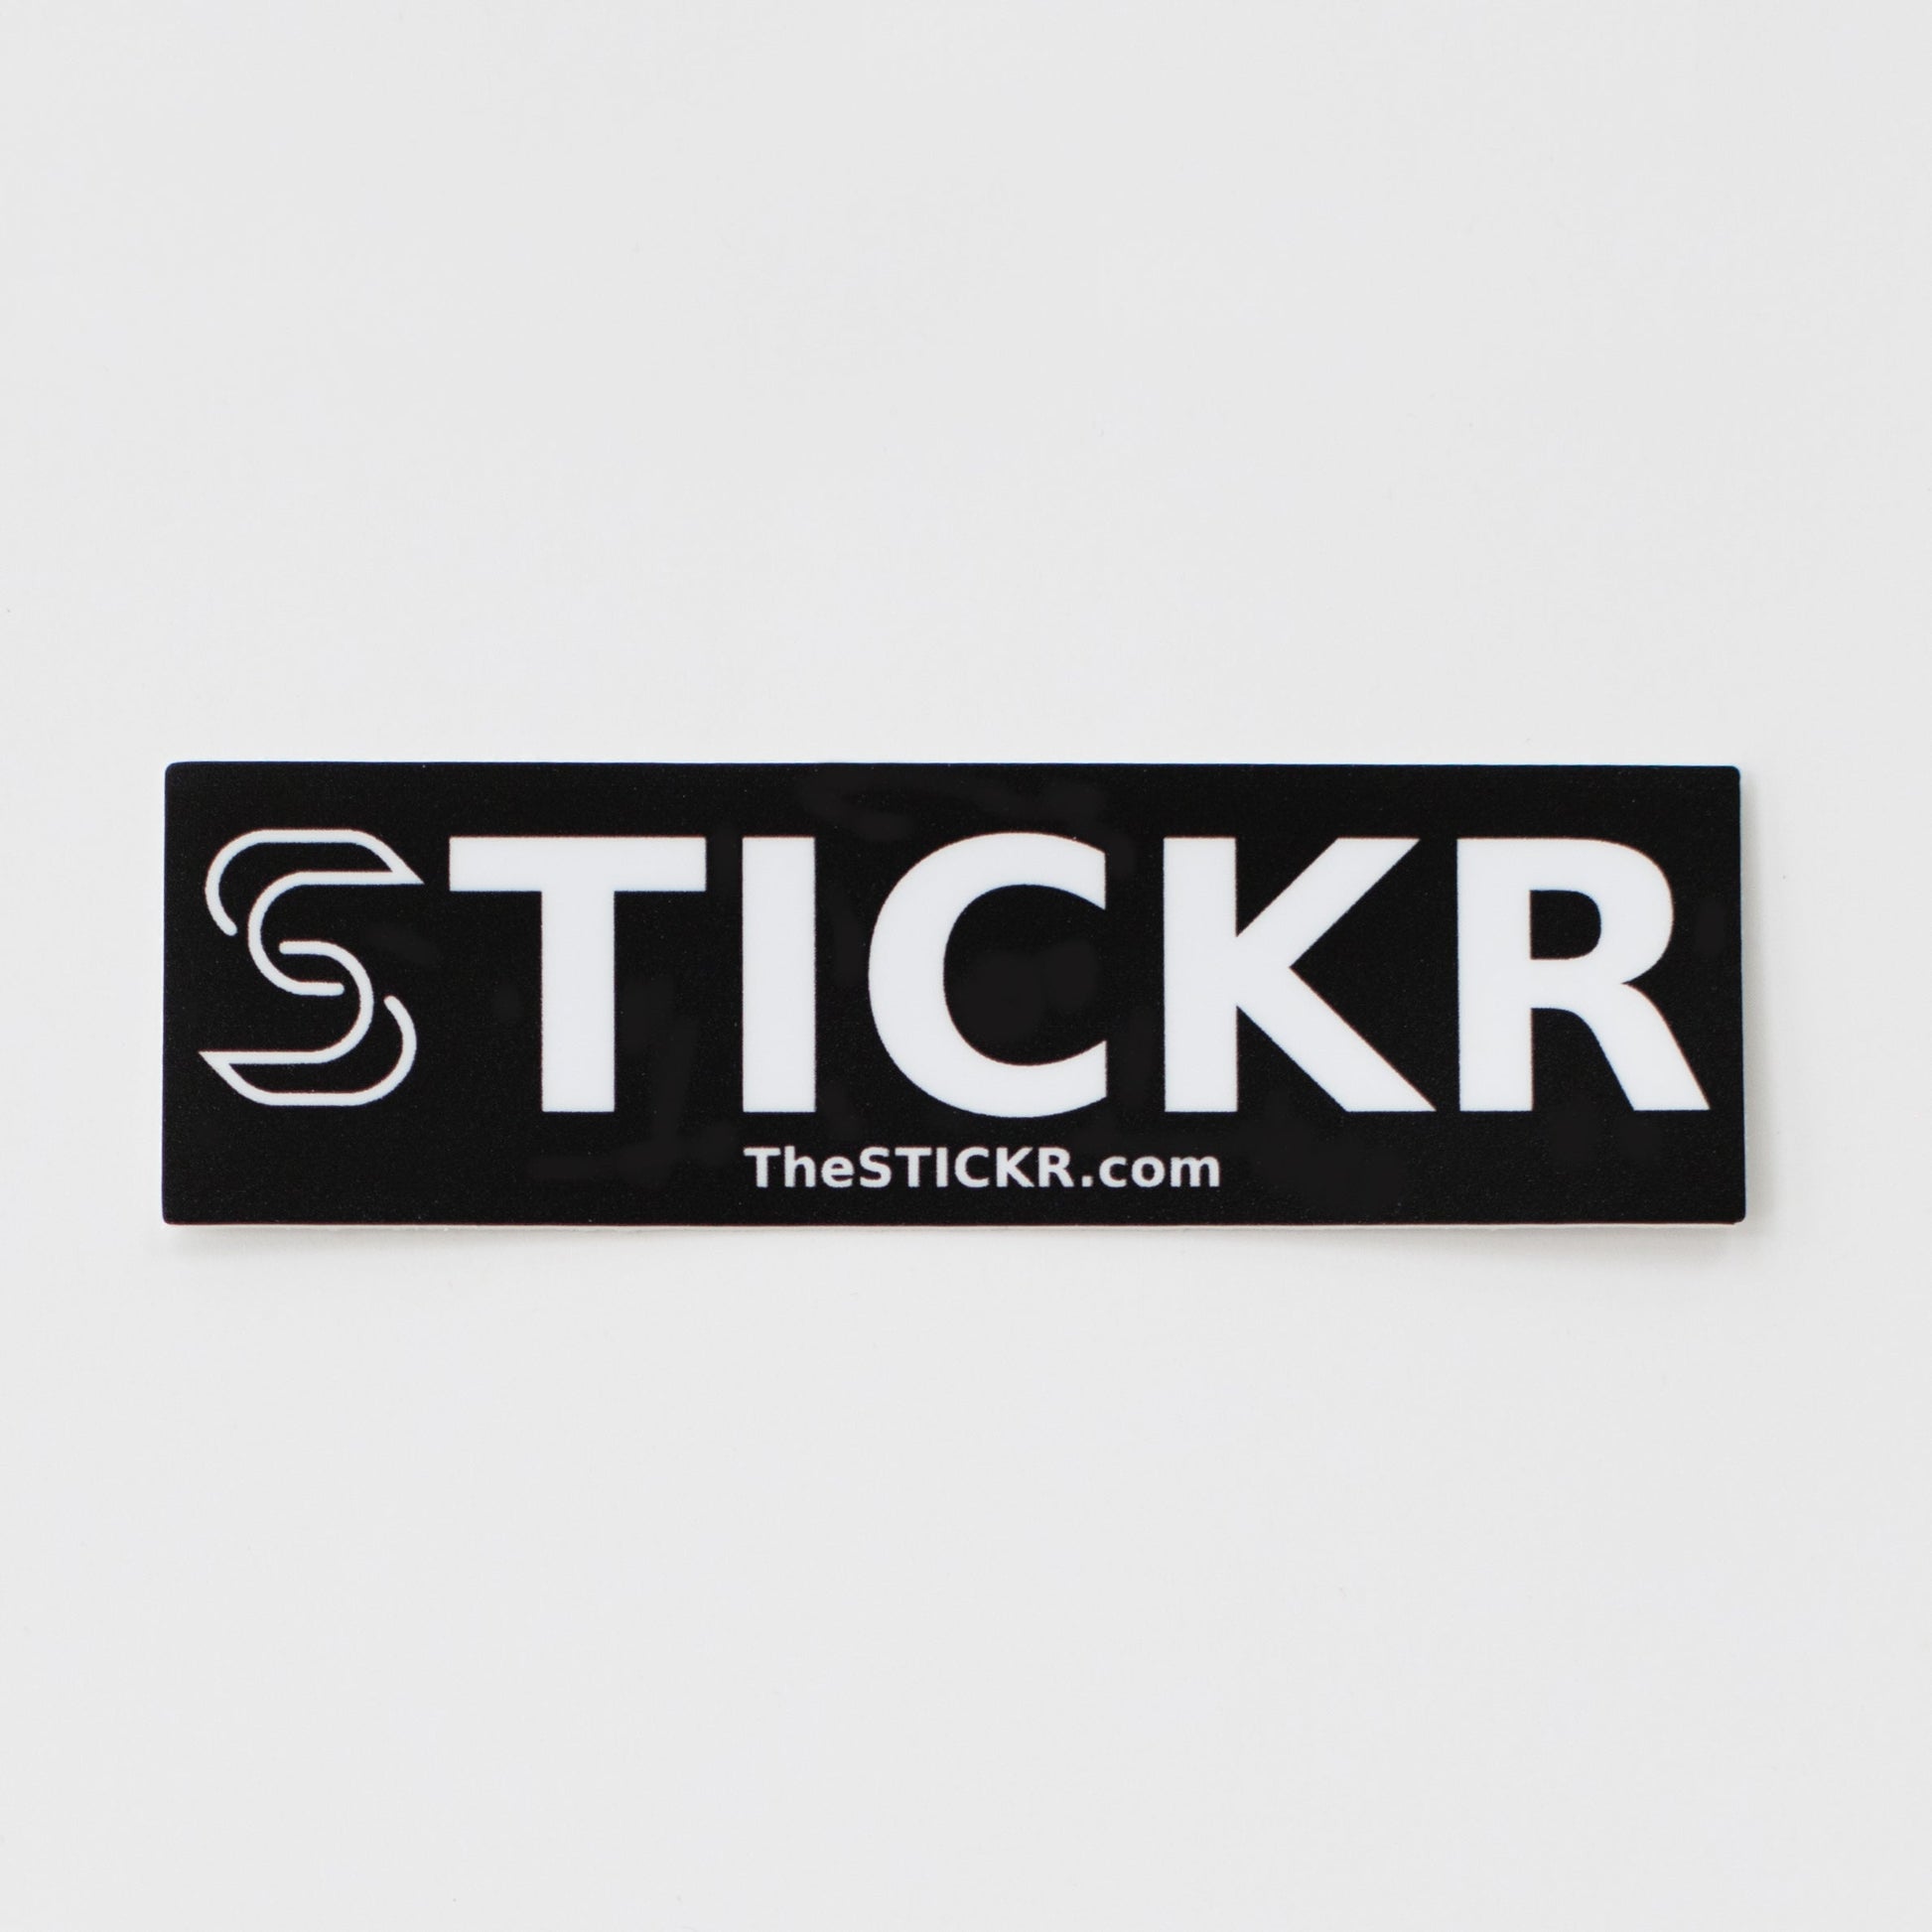 A rectangular black sticker of the Stickr logo and website on a white background